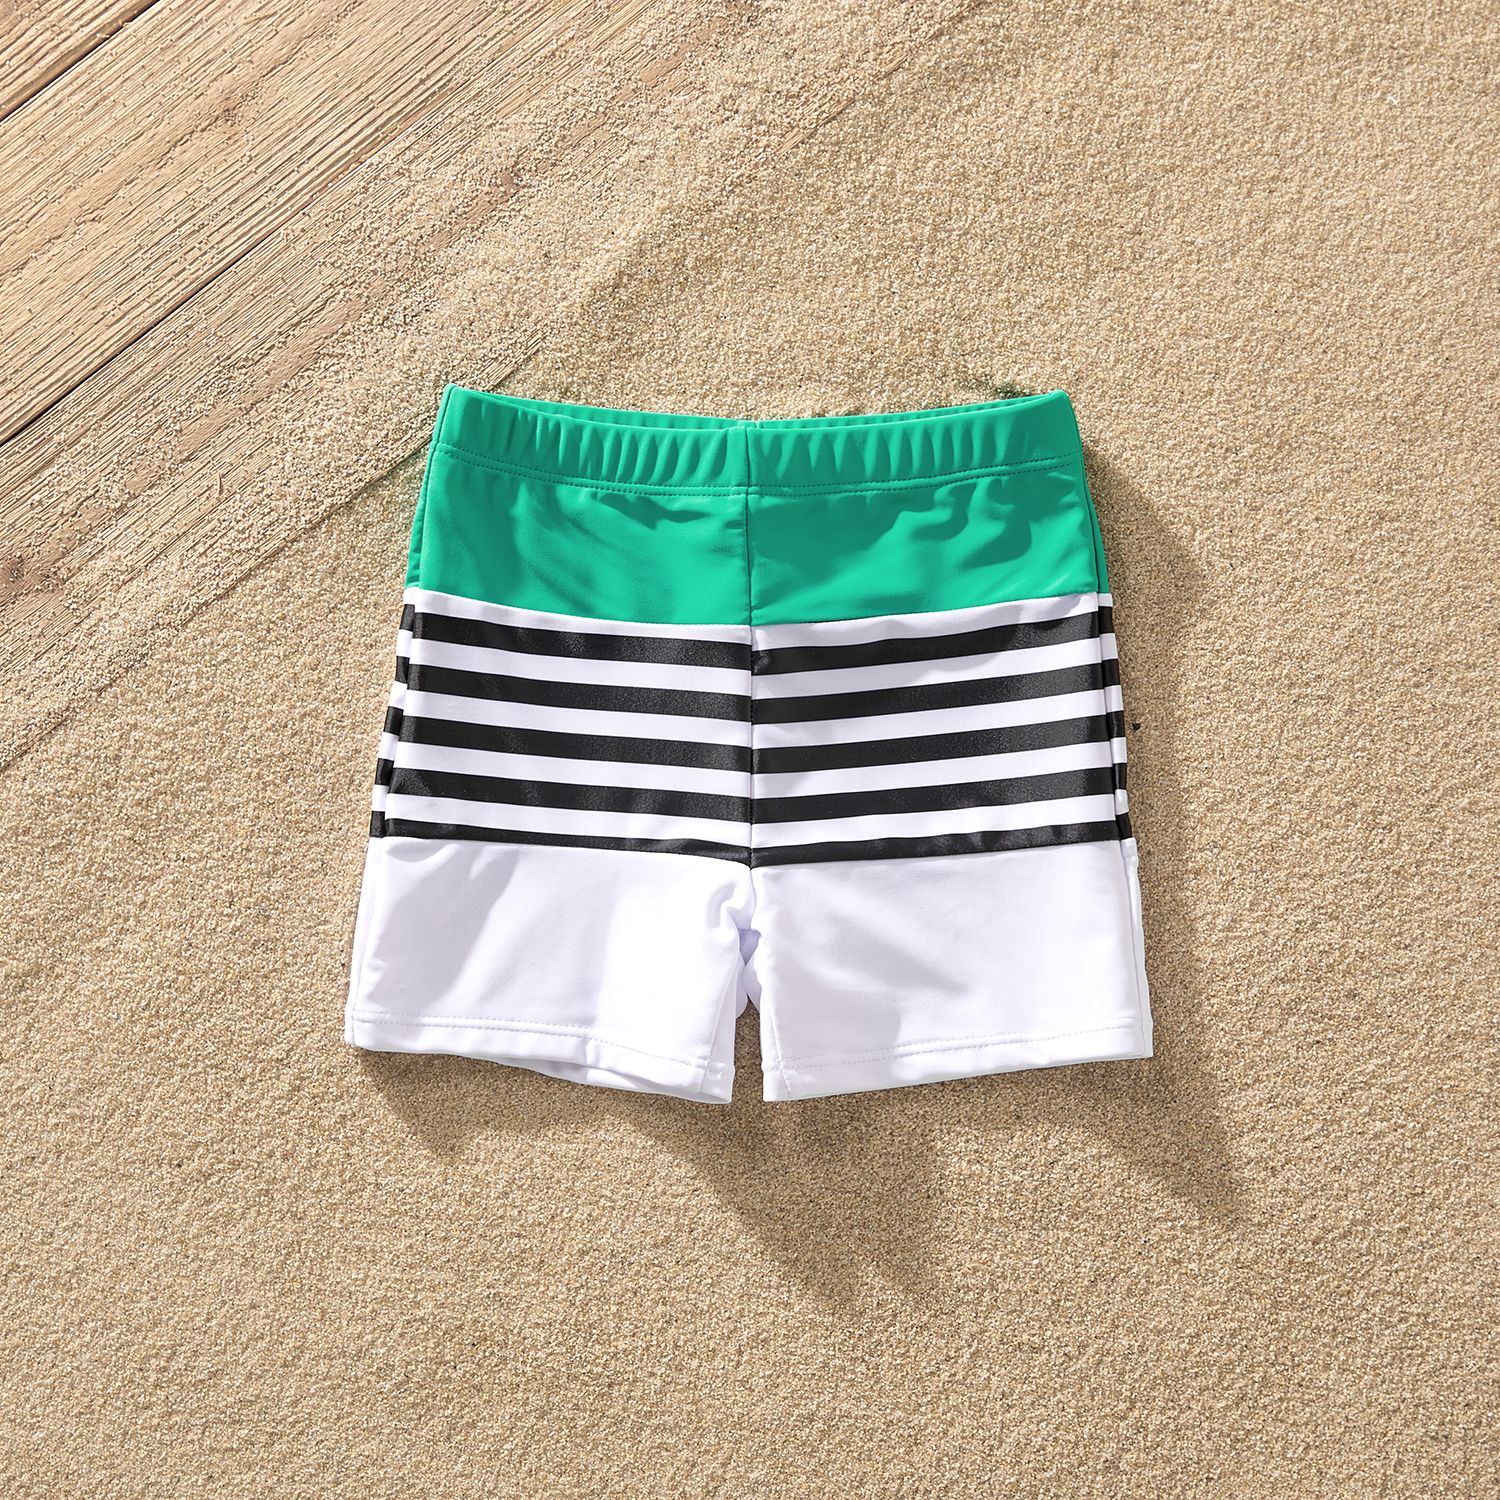 Family Matching Two Tone One-piece Swimsuit Or Stripe Panel Swim Trunks Shorts